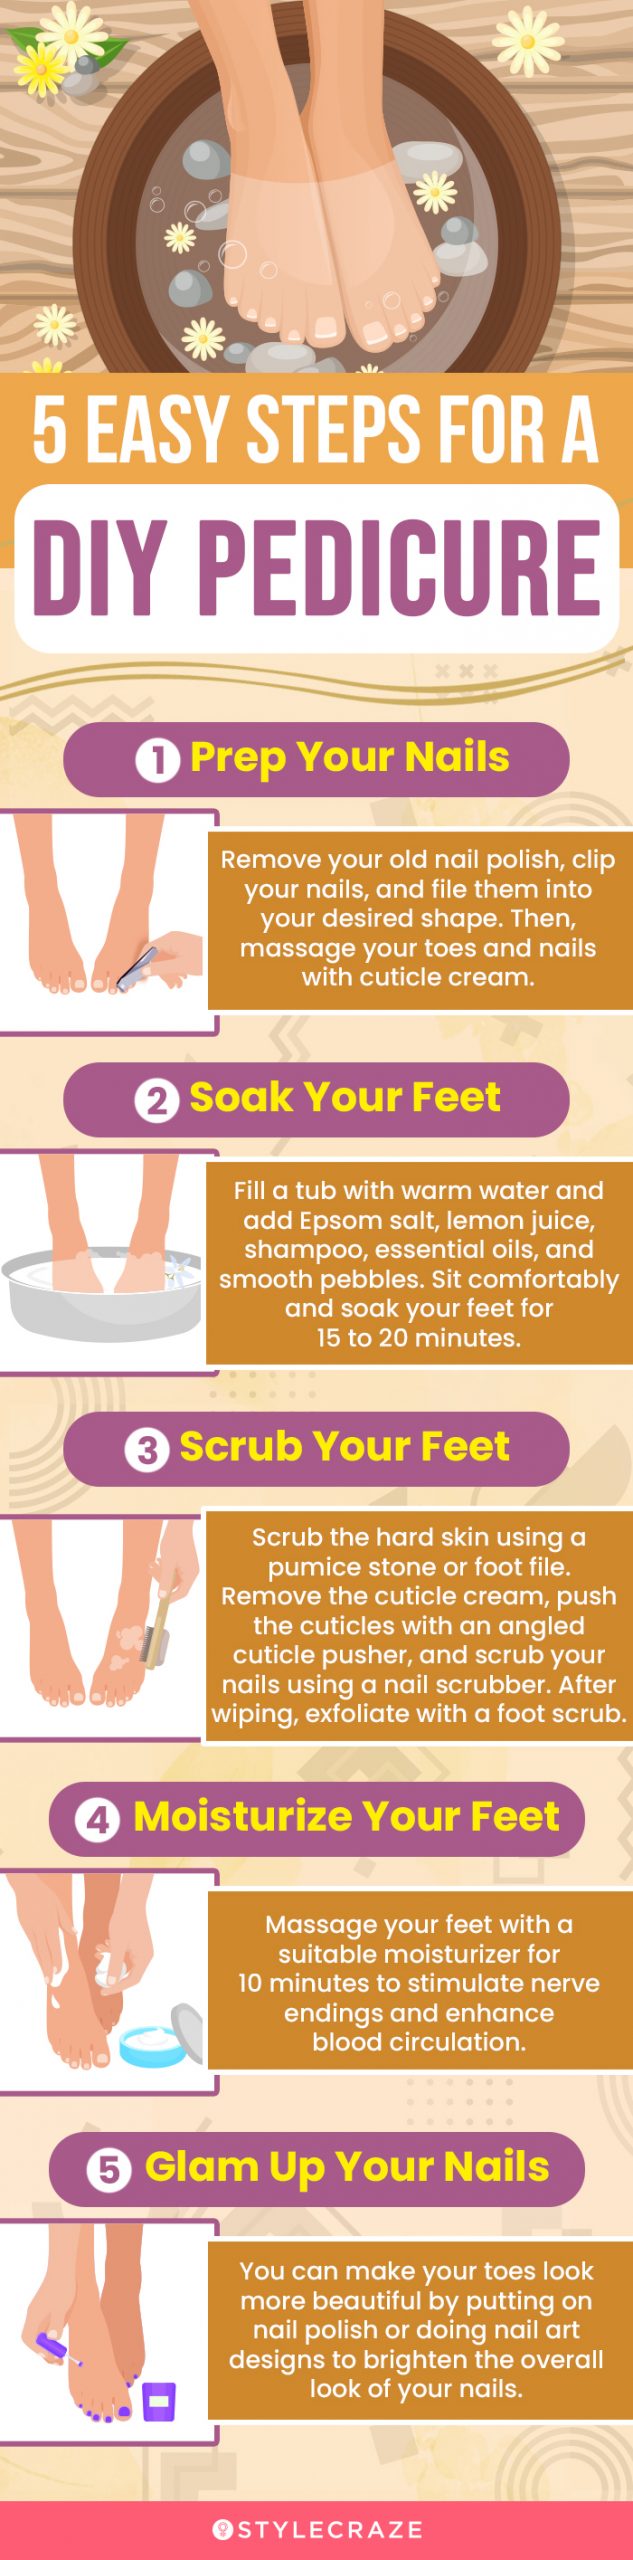 5 easy steps for a diy pedicure (infographic)